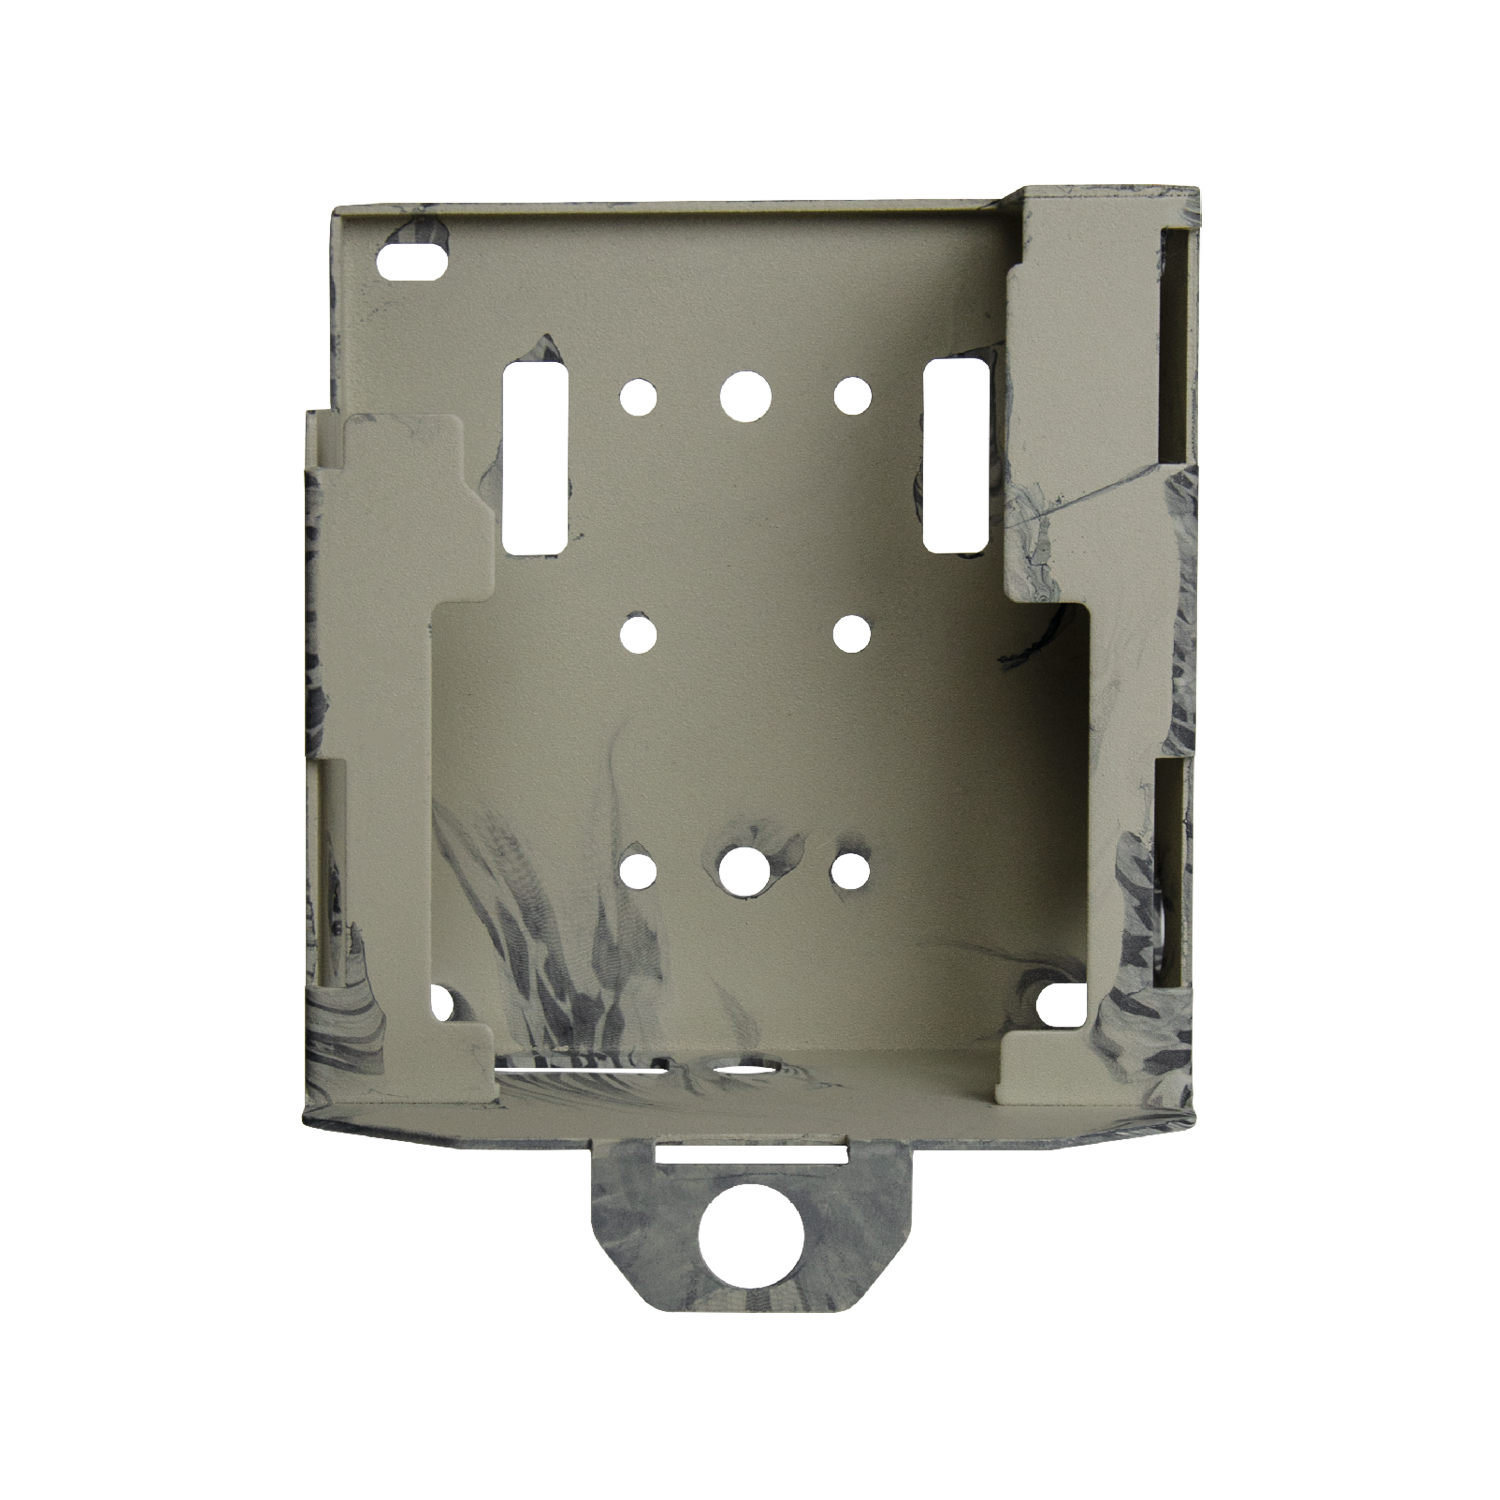 Spypoint SB-300s Steel Security Trail Cam Box